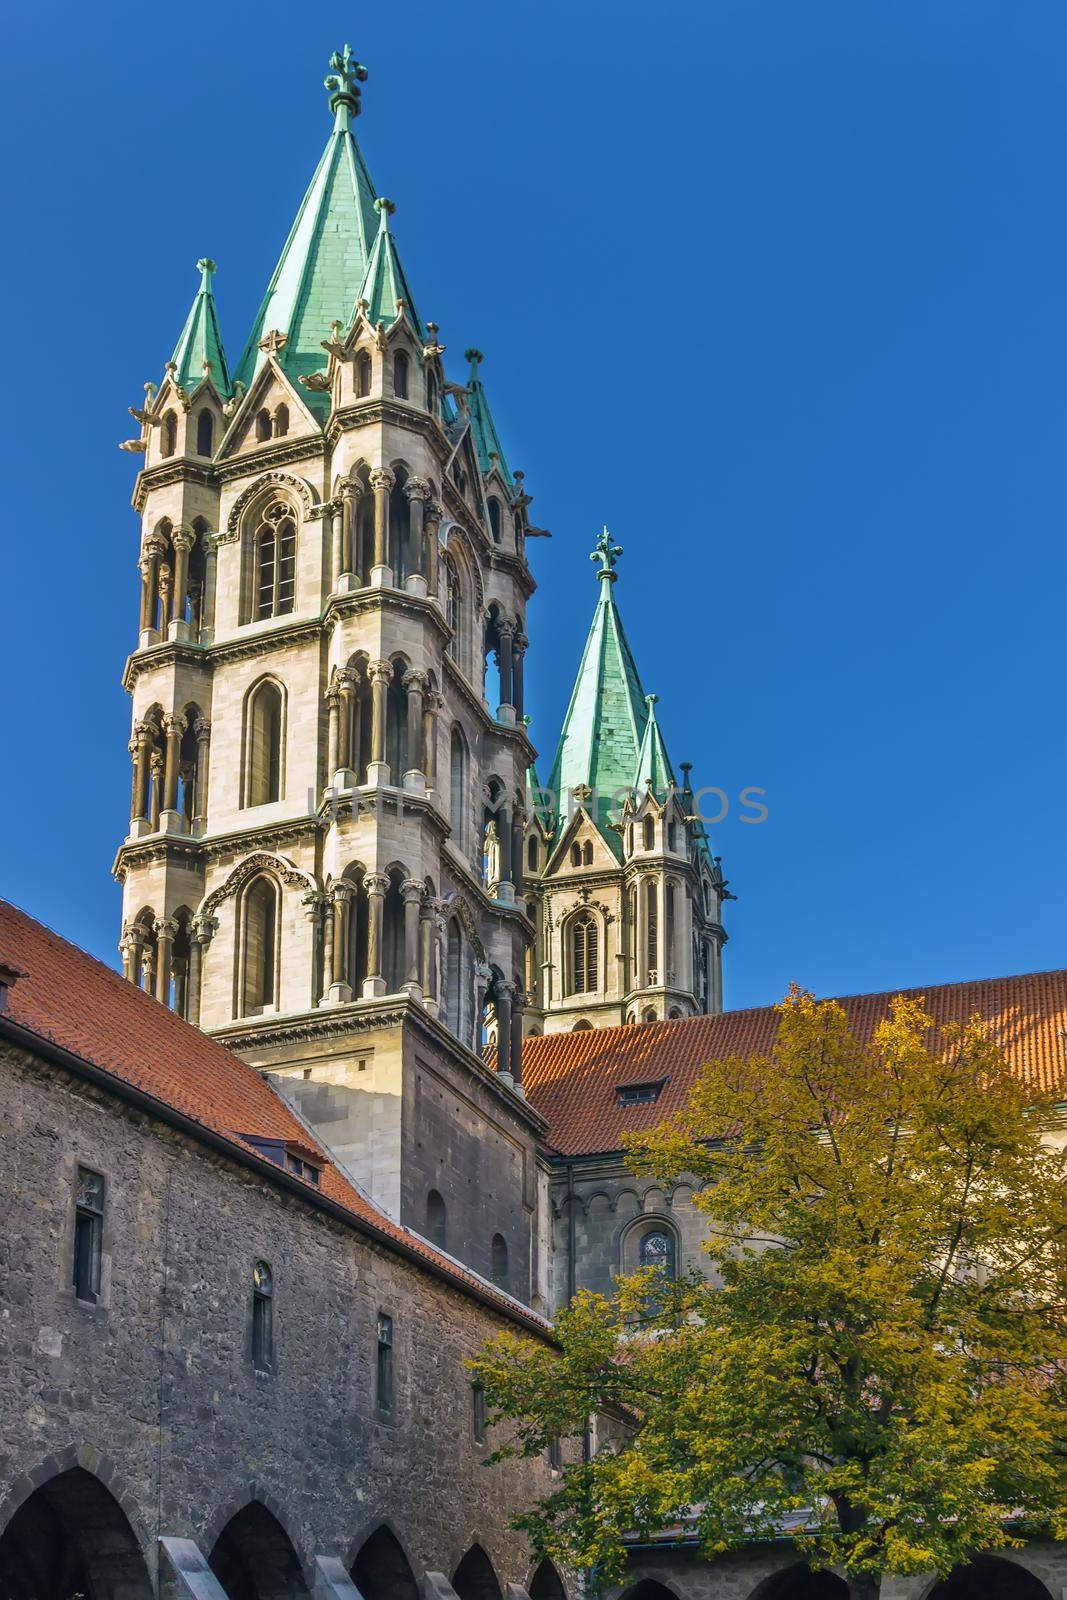 Naumburg Cathedral of the Holy Apostles Peter and Paul (Naumburger Dom) is a former cathedral located in Naumburg, Germany